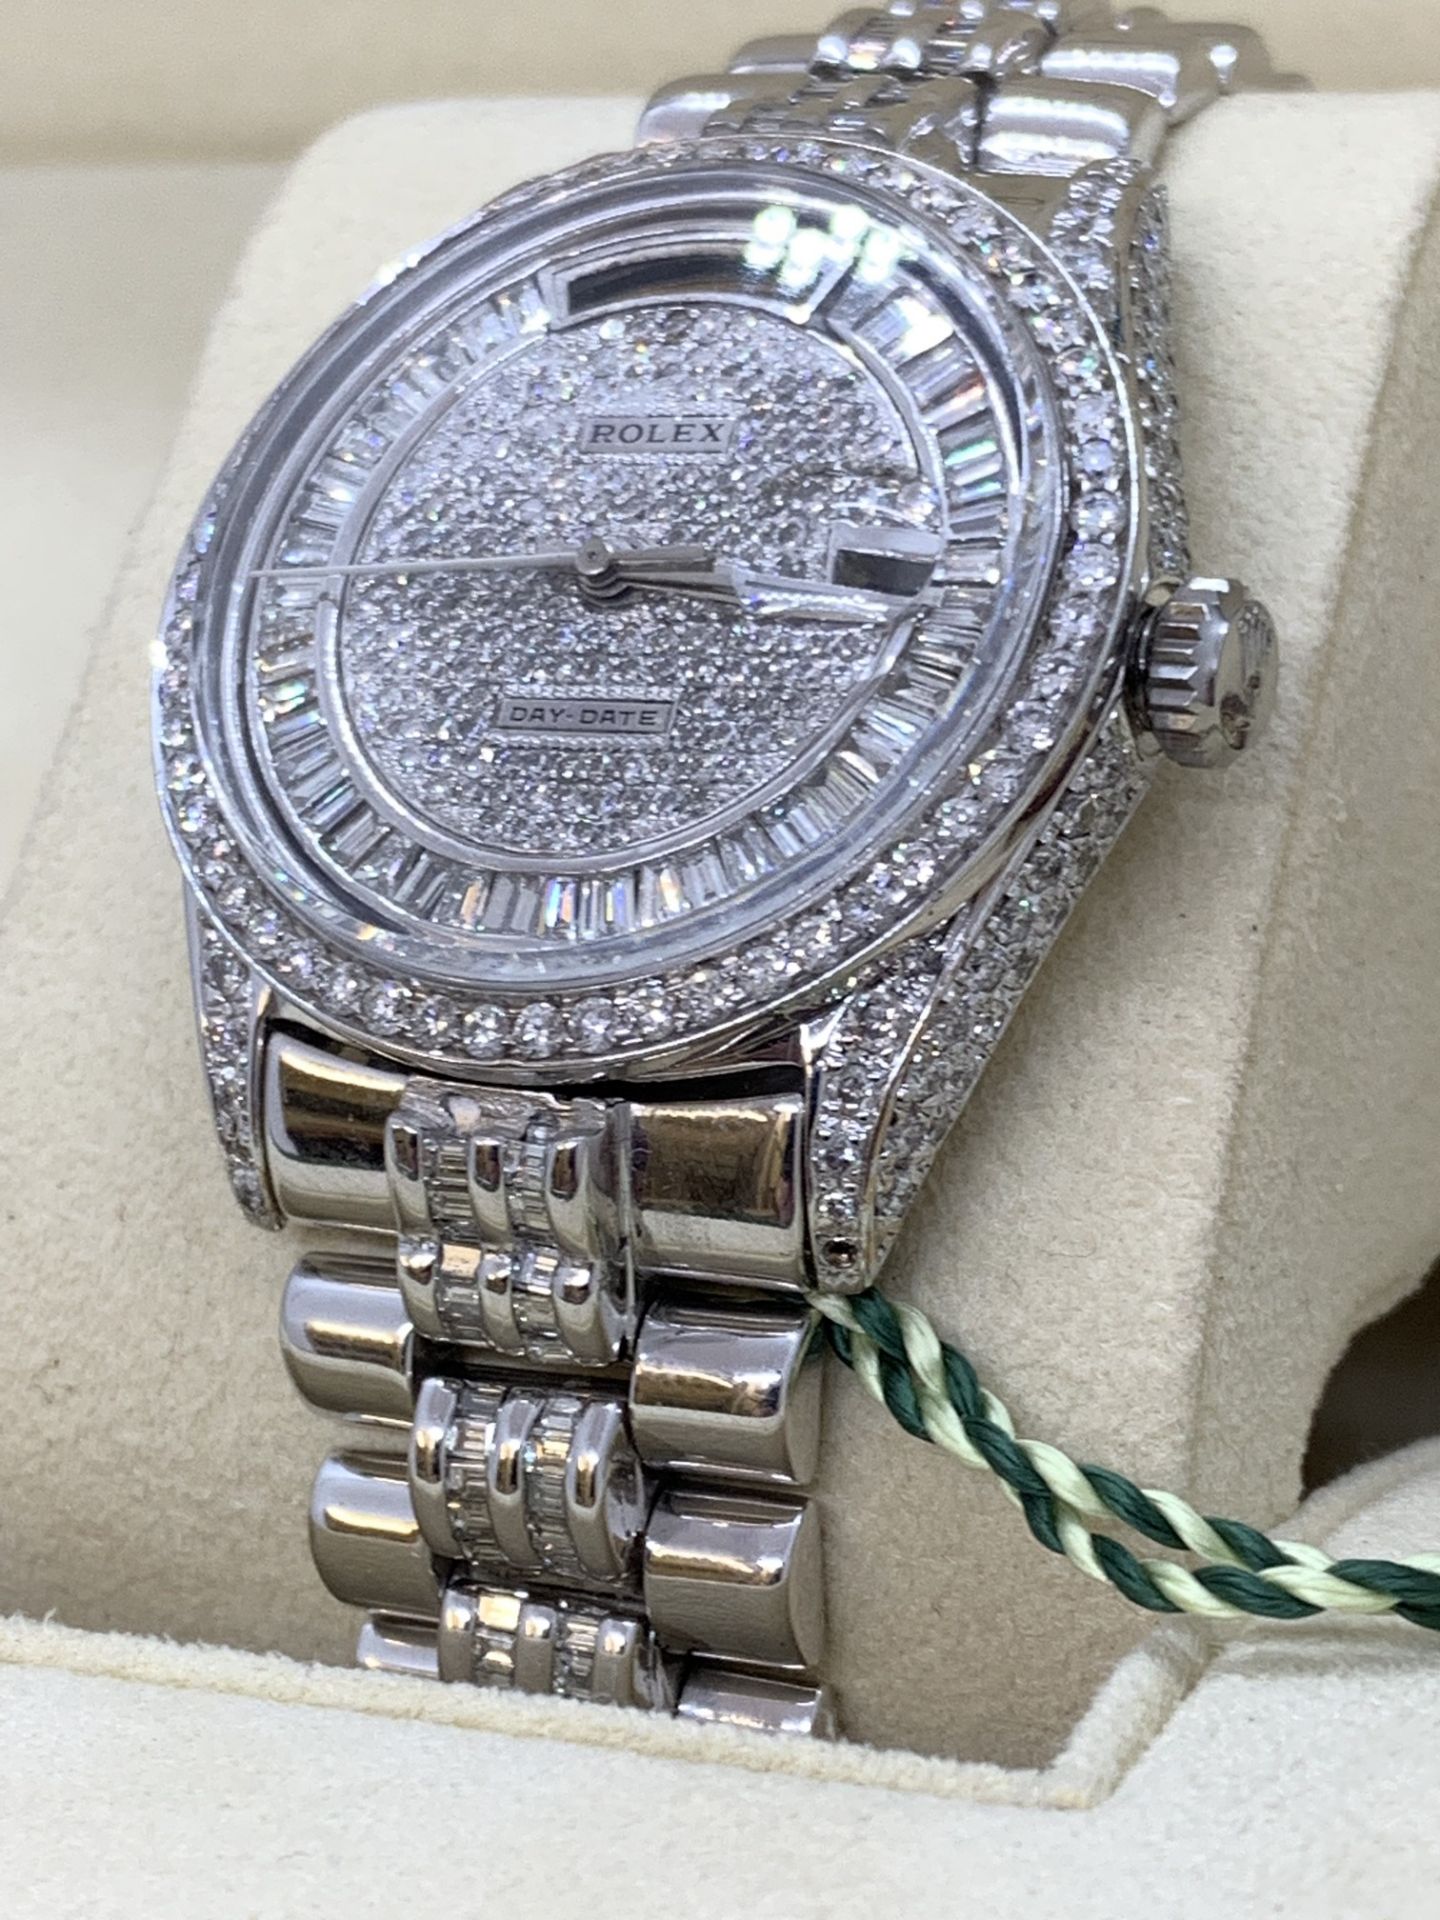 36mm DIAMOND SET DAY-DATE WATCH MARKED ROLEX SET IN WHITE METAL (TESTED AS GOLD) - Image 3 of 15